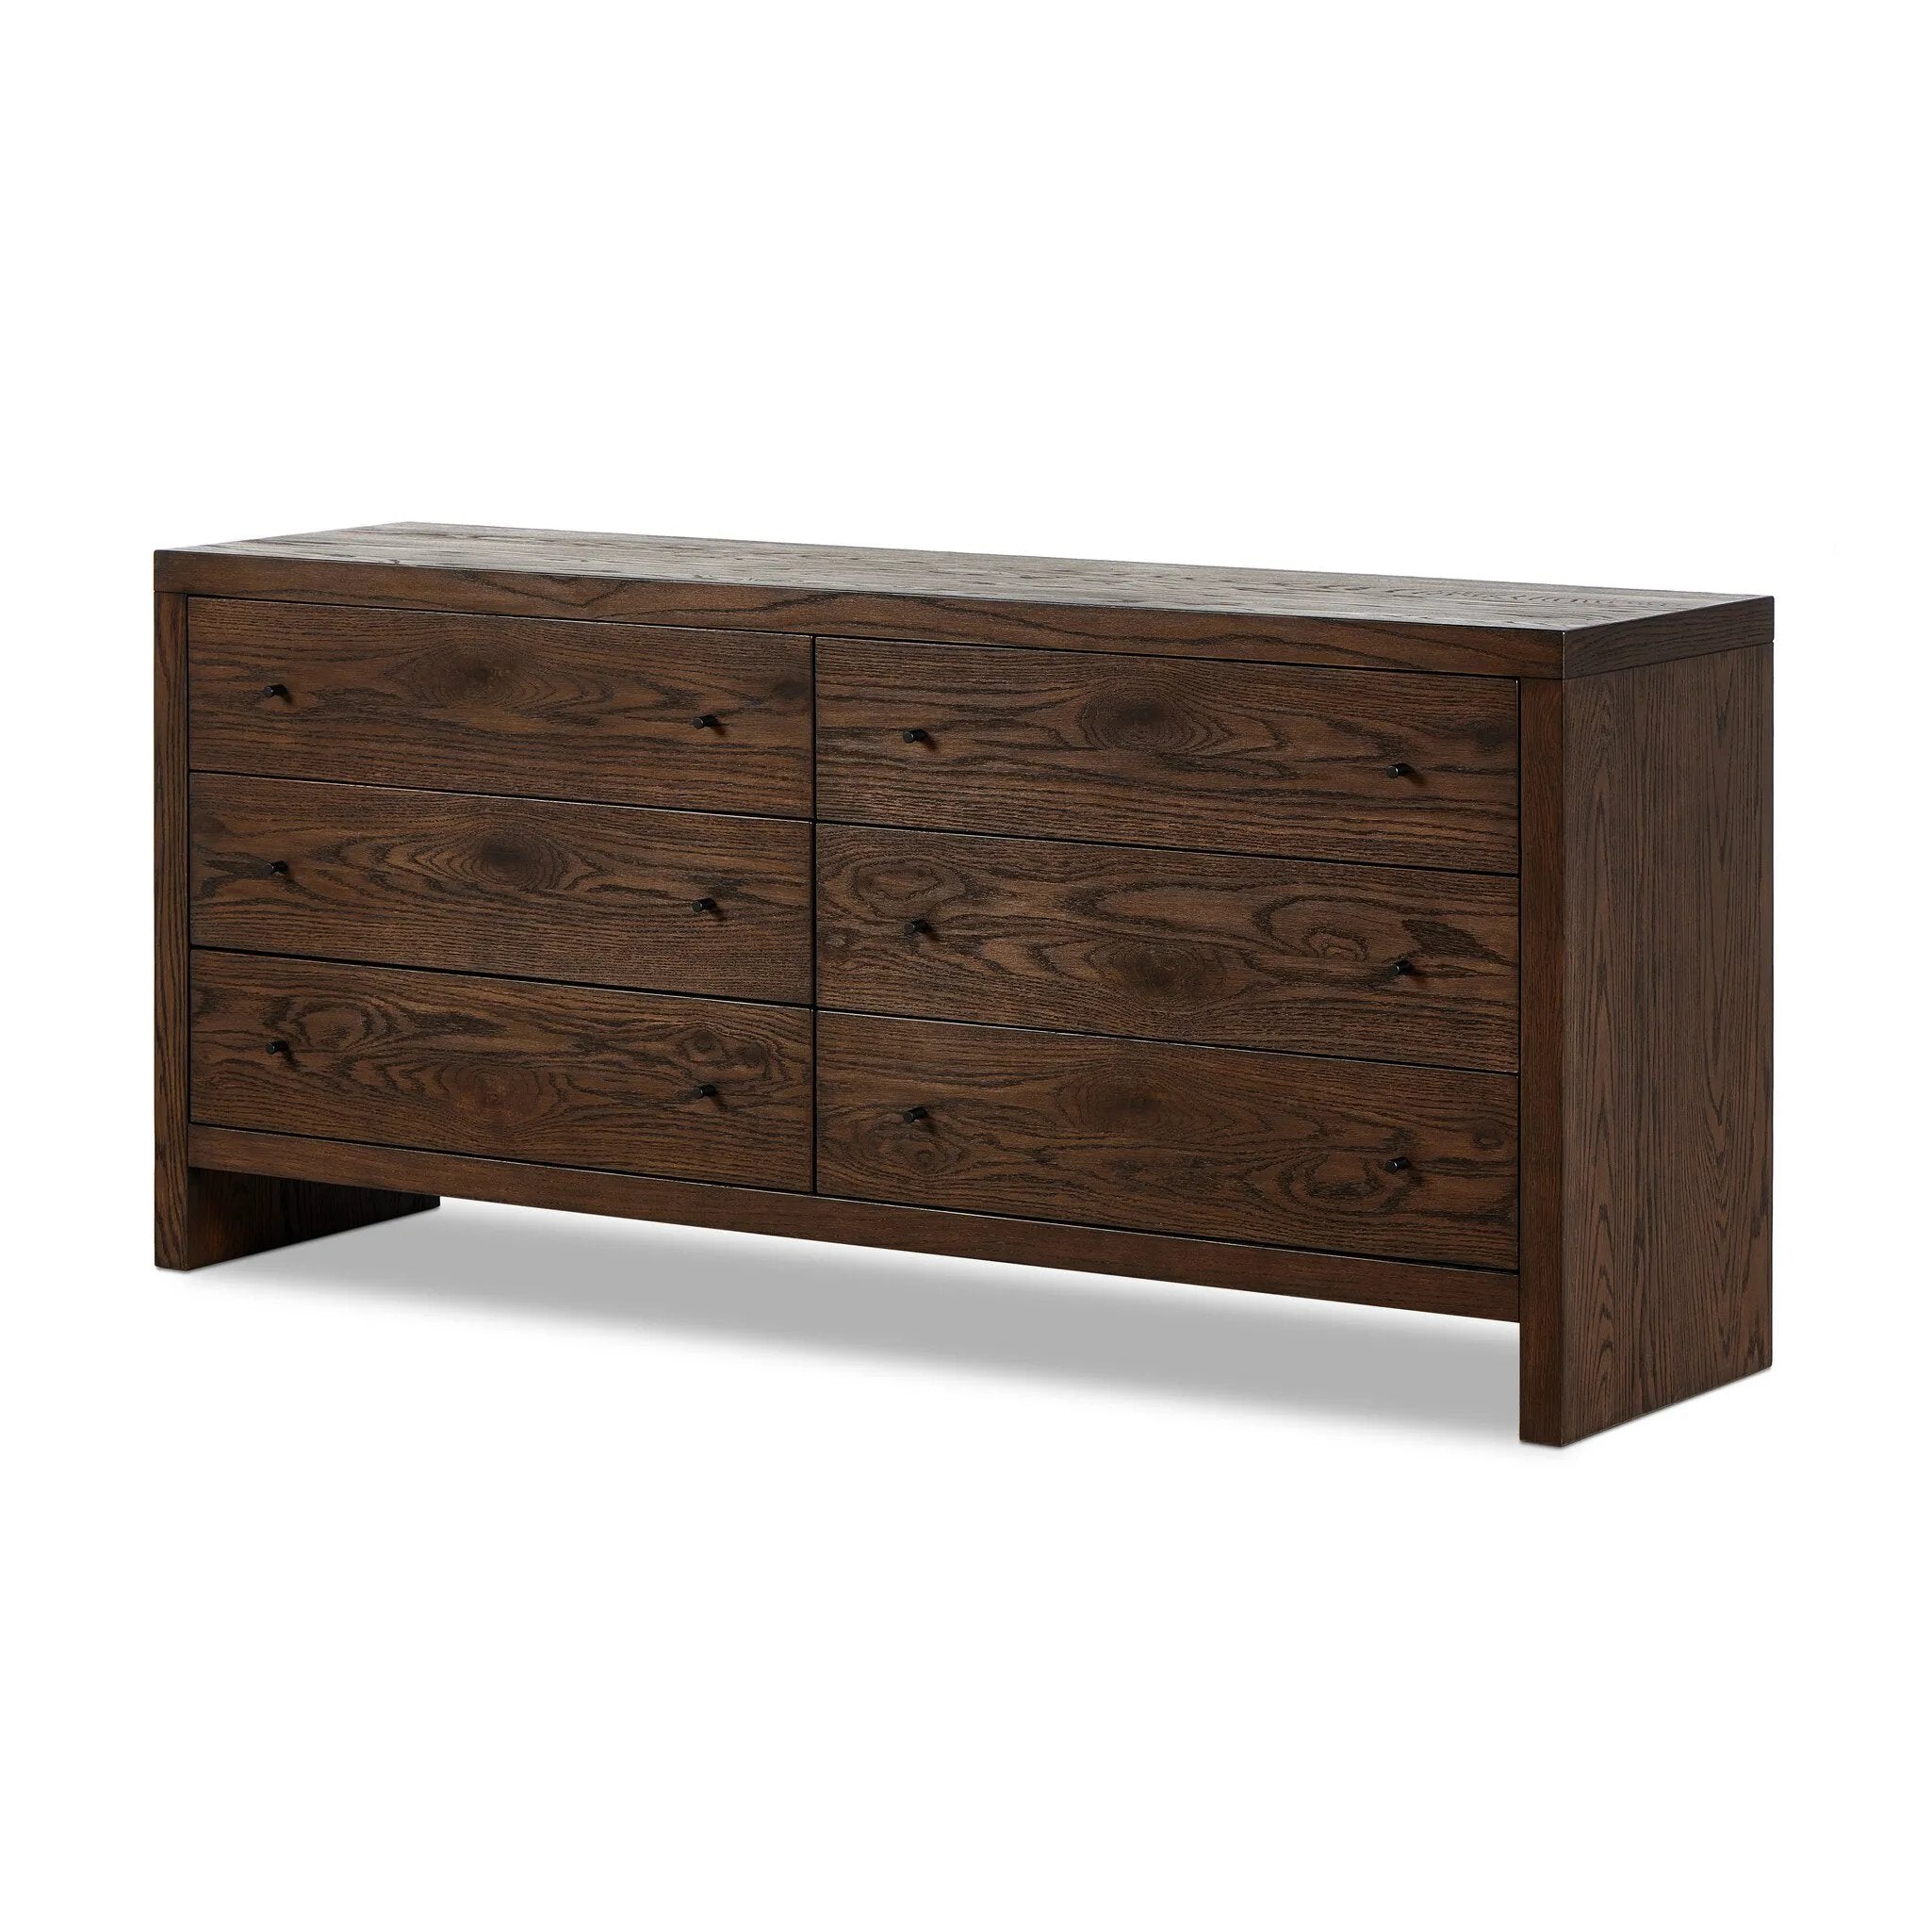 Straight planks of solid umber oak and veneer encase this spacious dresser for an understated modern look. Deep wood grain adds natural character.Collection: Hamilto Amethyst Home provides interior design, new home construction design consulting, vintage area rugs, and lighting in the Alpharetta metro area.